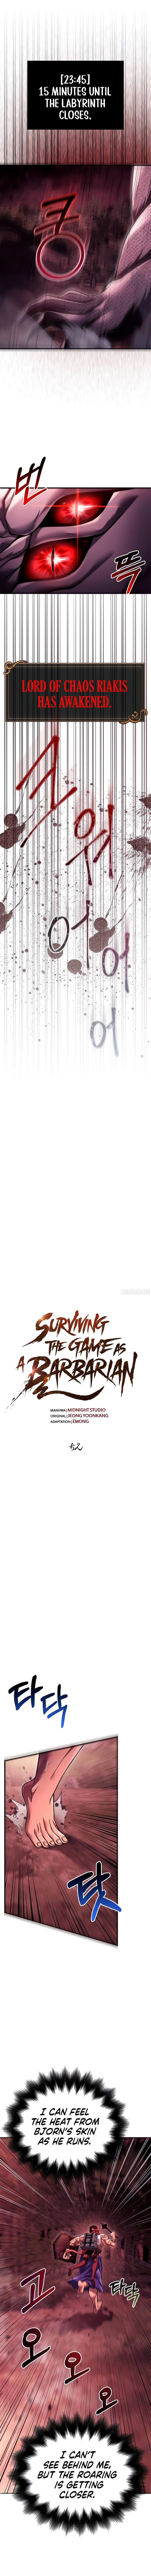 surviving-the-game-as-a-barbarian-chap-52-9